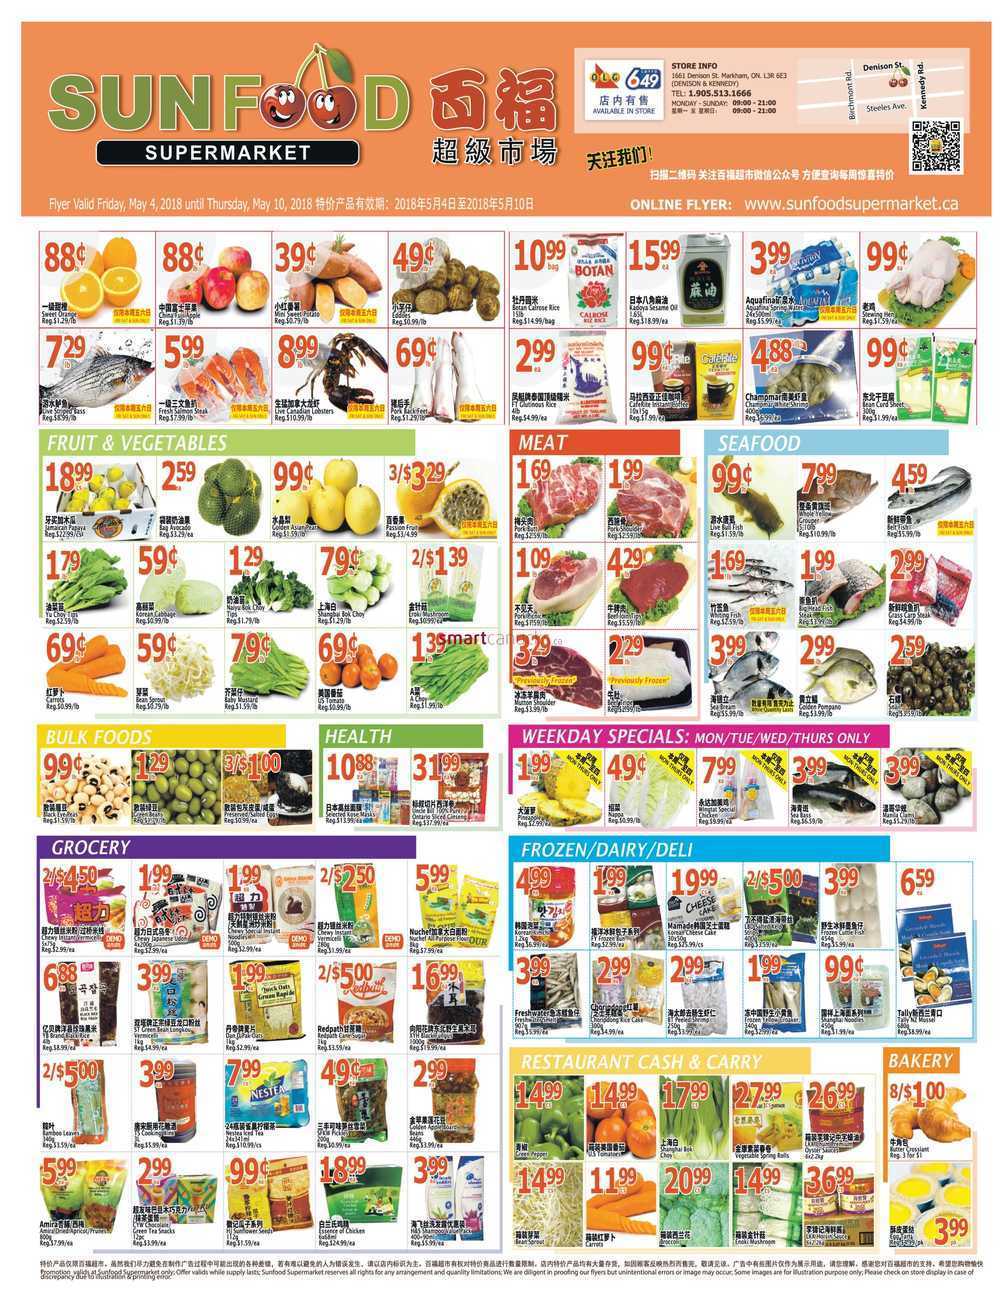 Sunfood Supermarket Flyer May 4 to 10